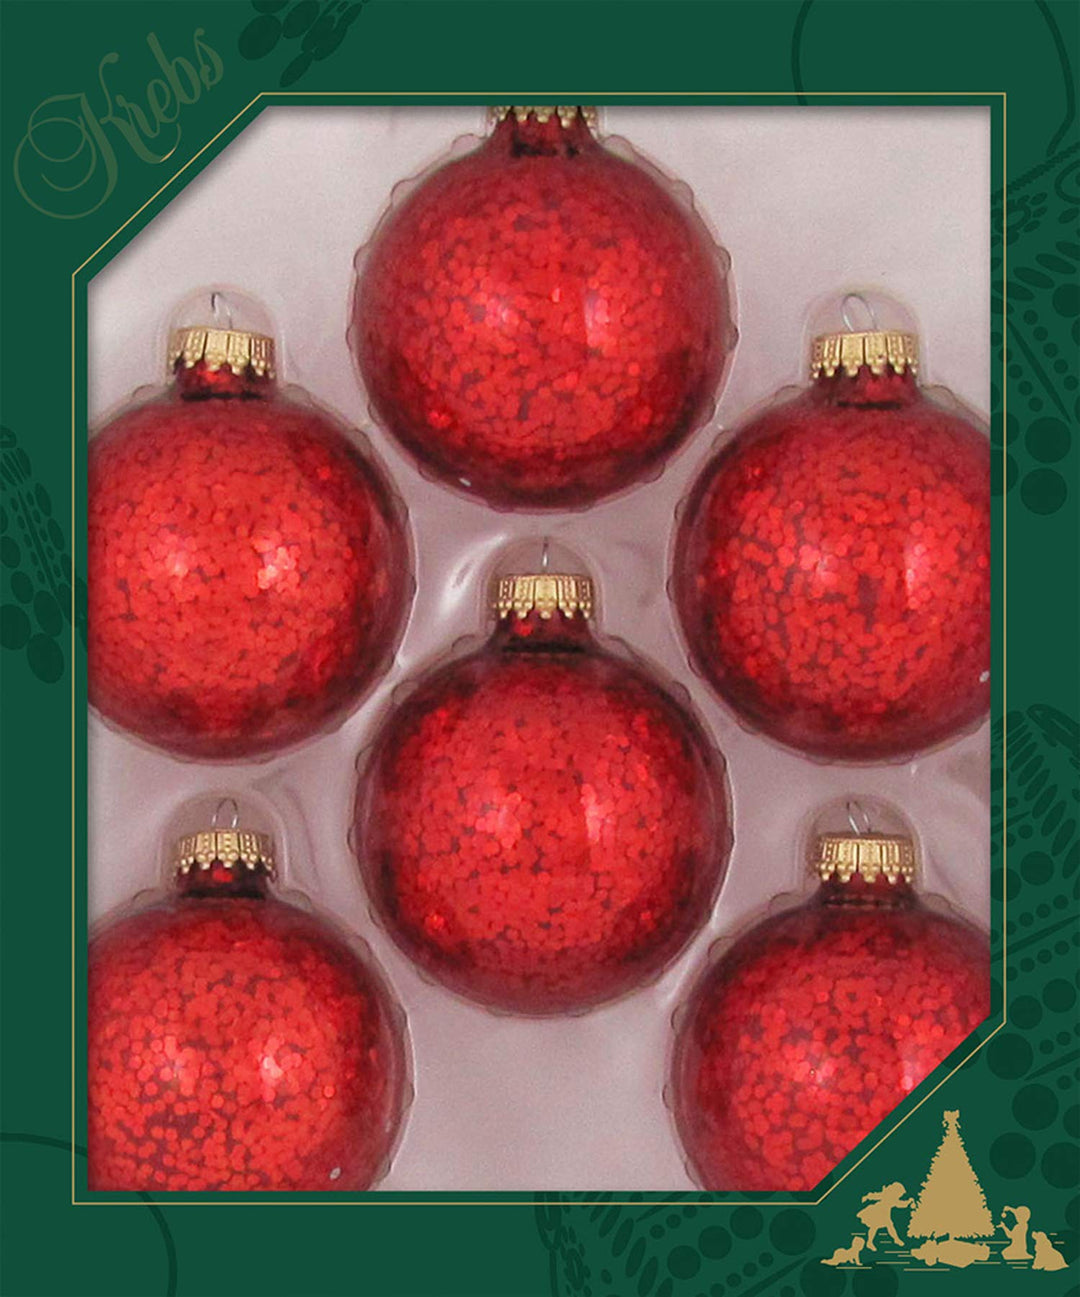 Christmas Tree Ornaments - 67mm / 2.625" [6 Pieces] Designer Glass Baubles from Christmas By Krebs - Handcrafted Seamless Hanging Holiday Decor for Trees (Crimson Red Spangle)